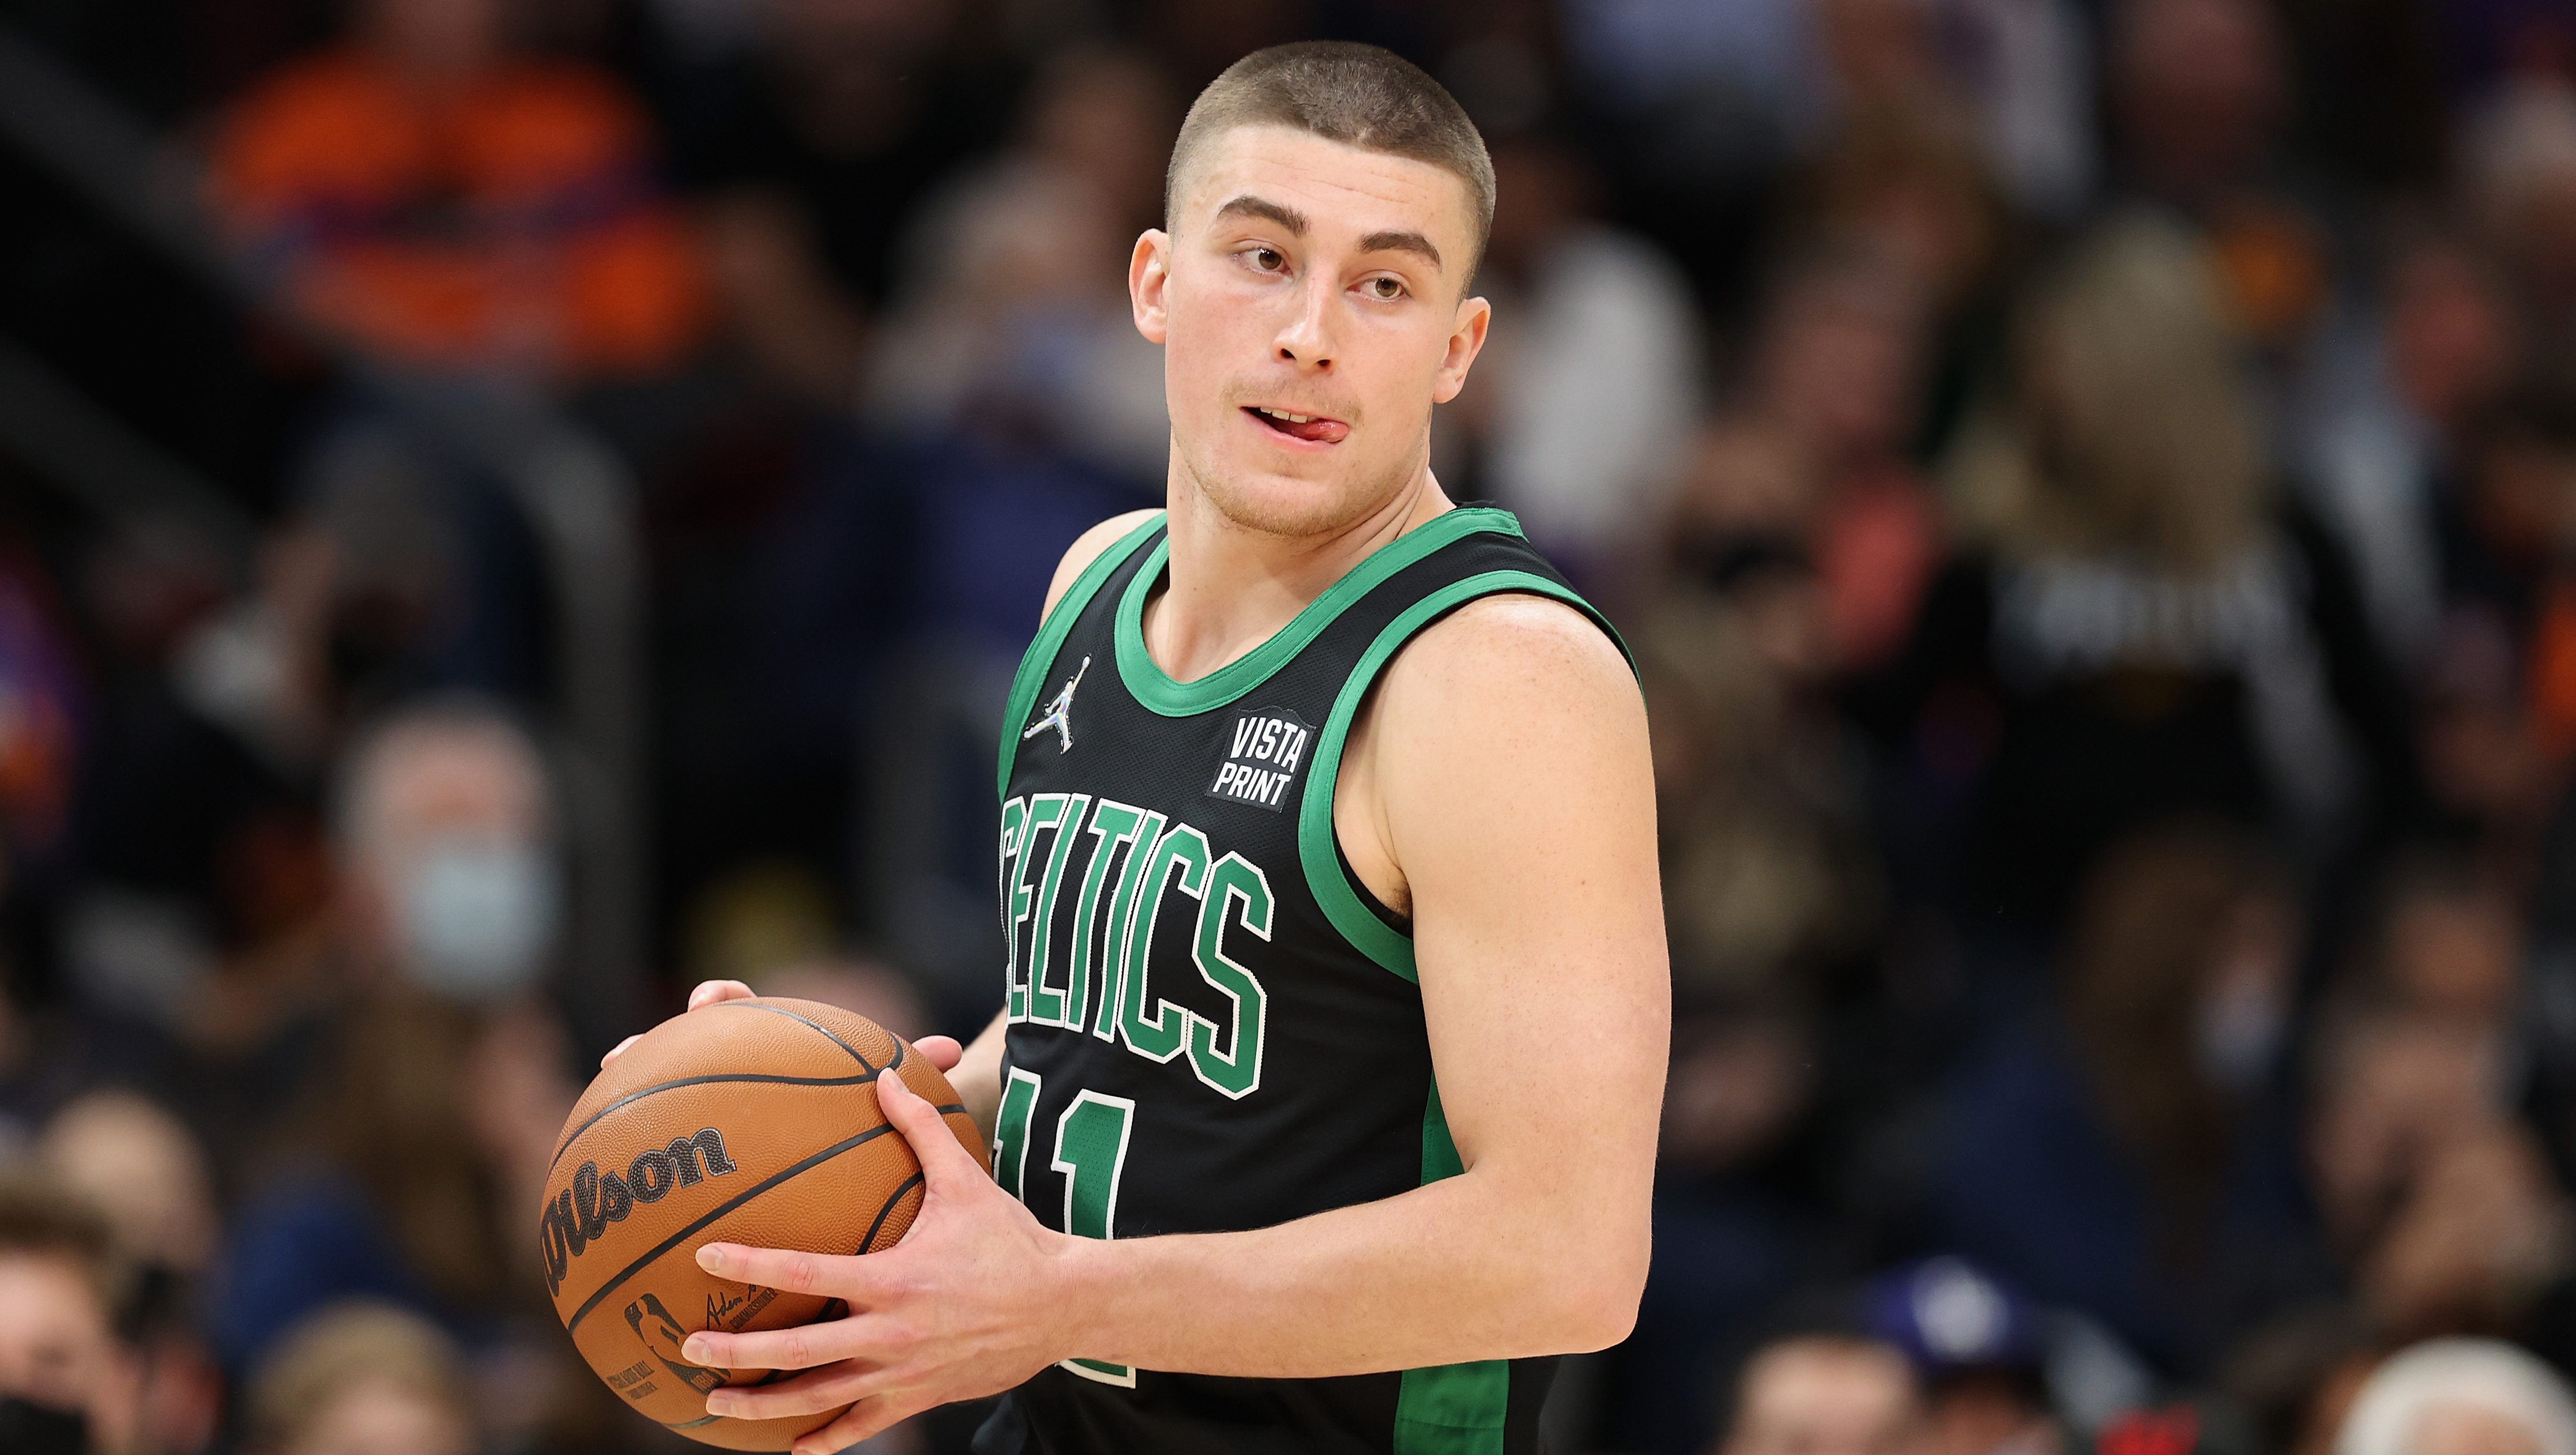 Payton Pritchard thriving in backup role for Boston Celtics